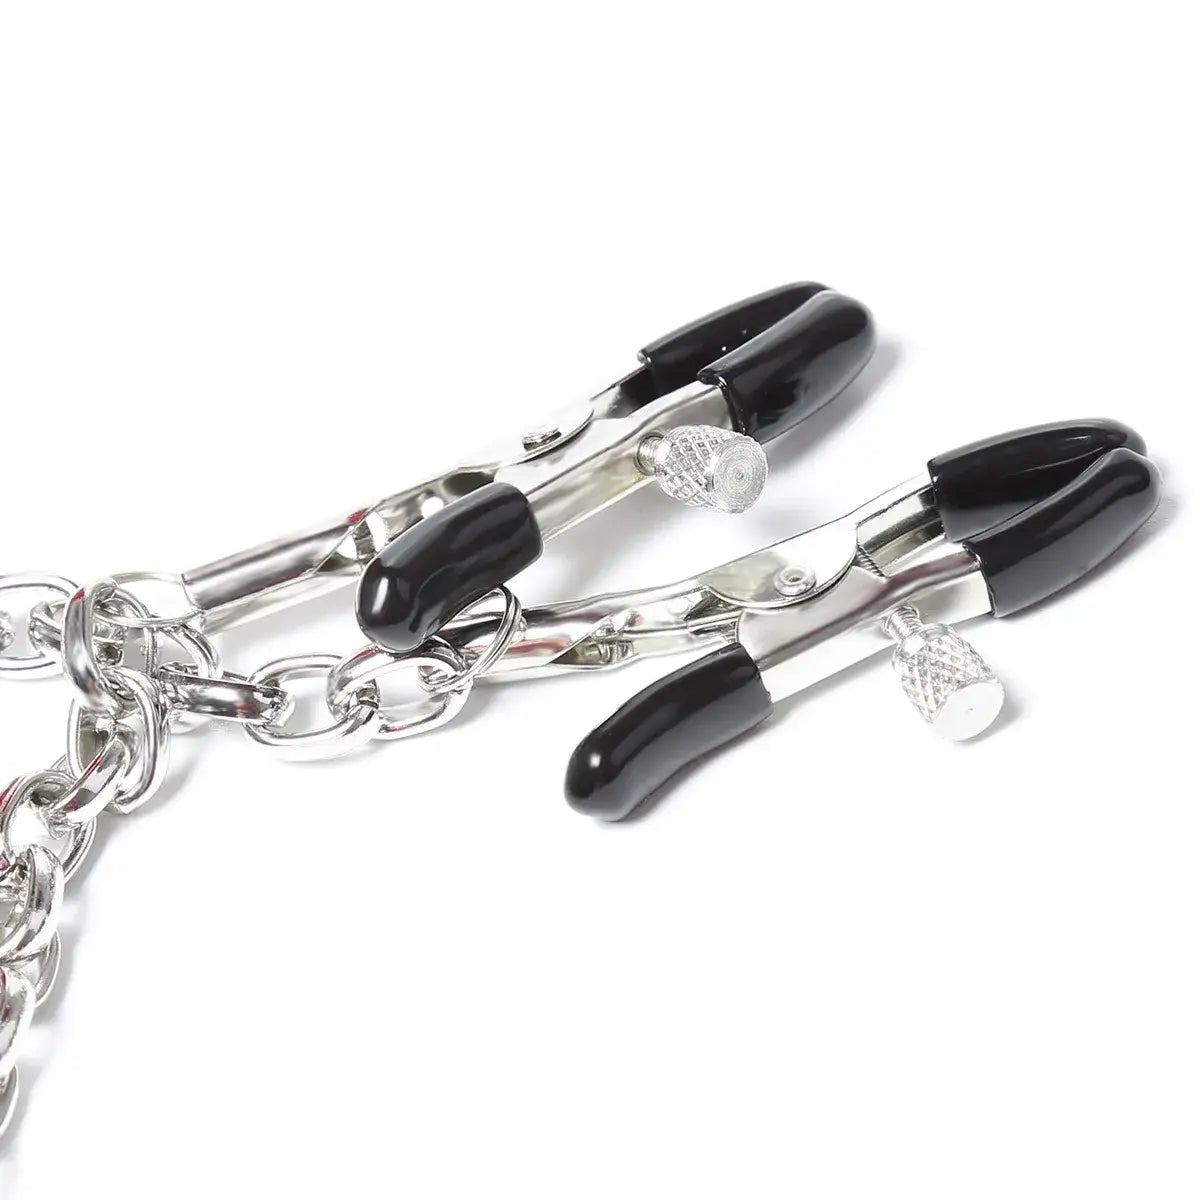 Nipple play toy adjustable clamps w/ chain (2 colors)